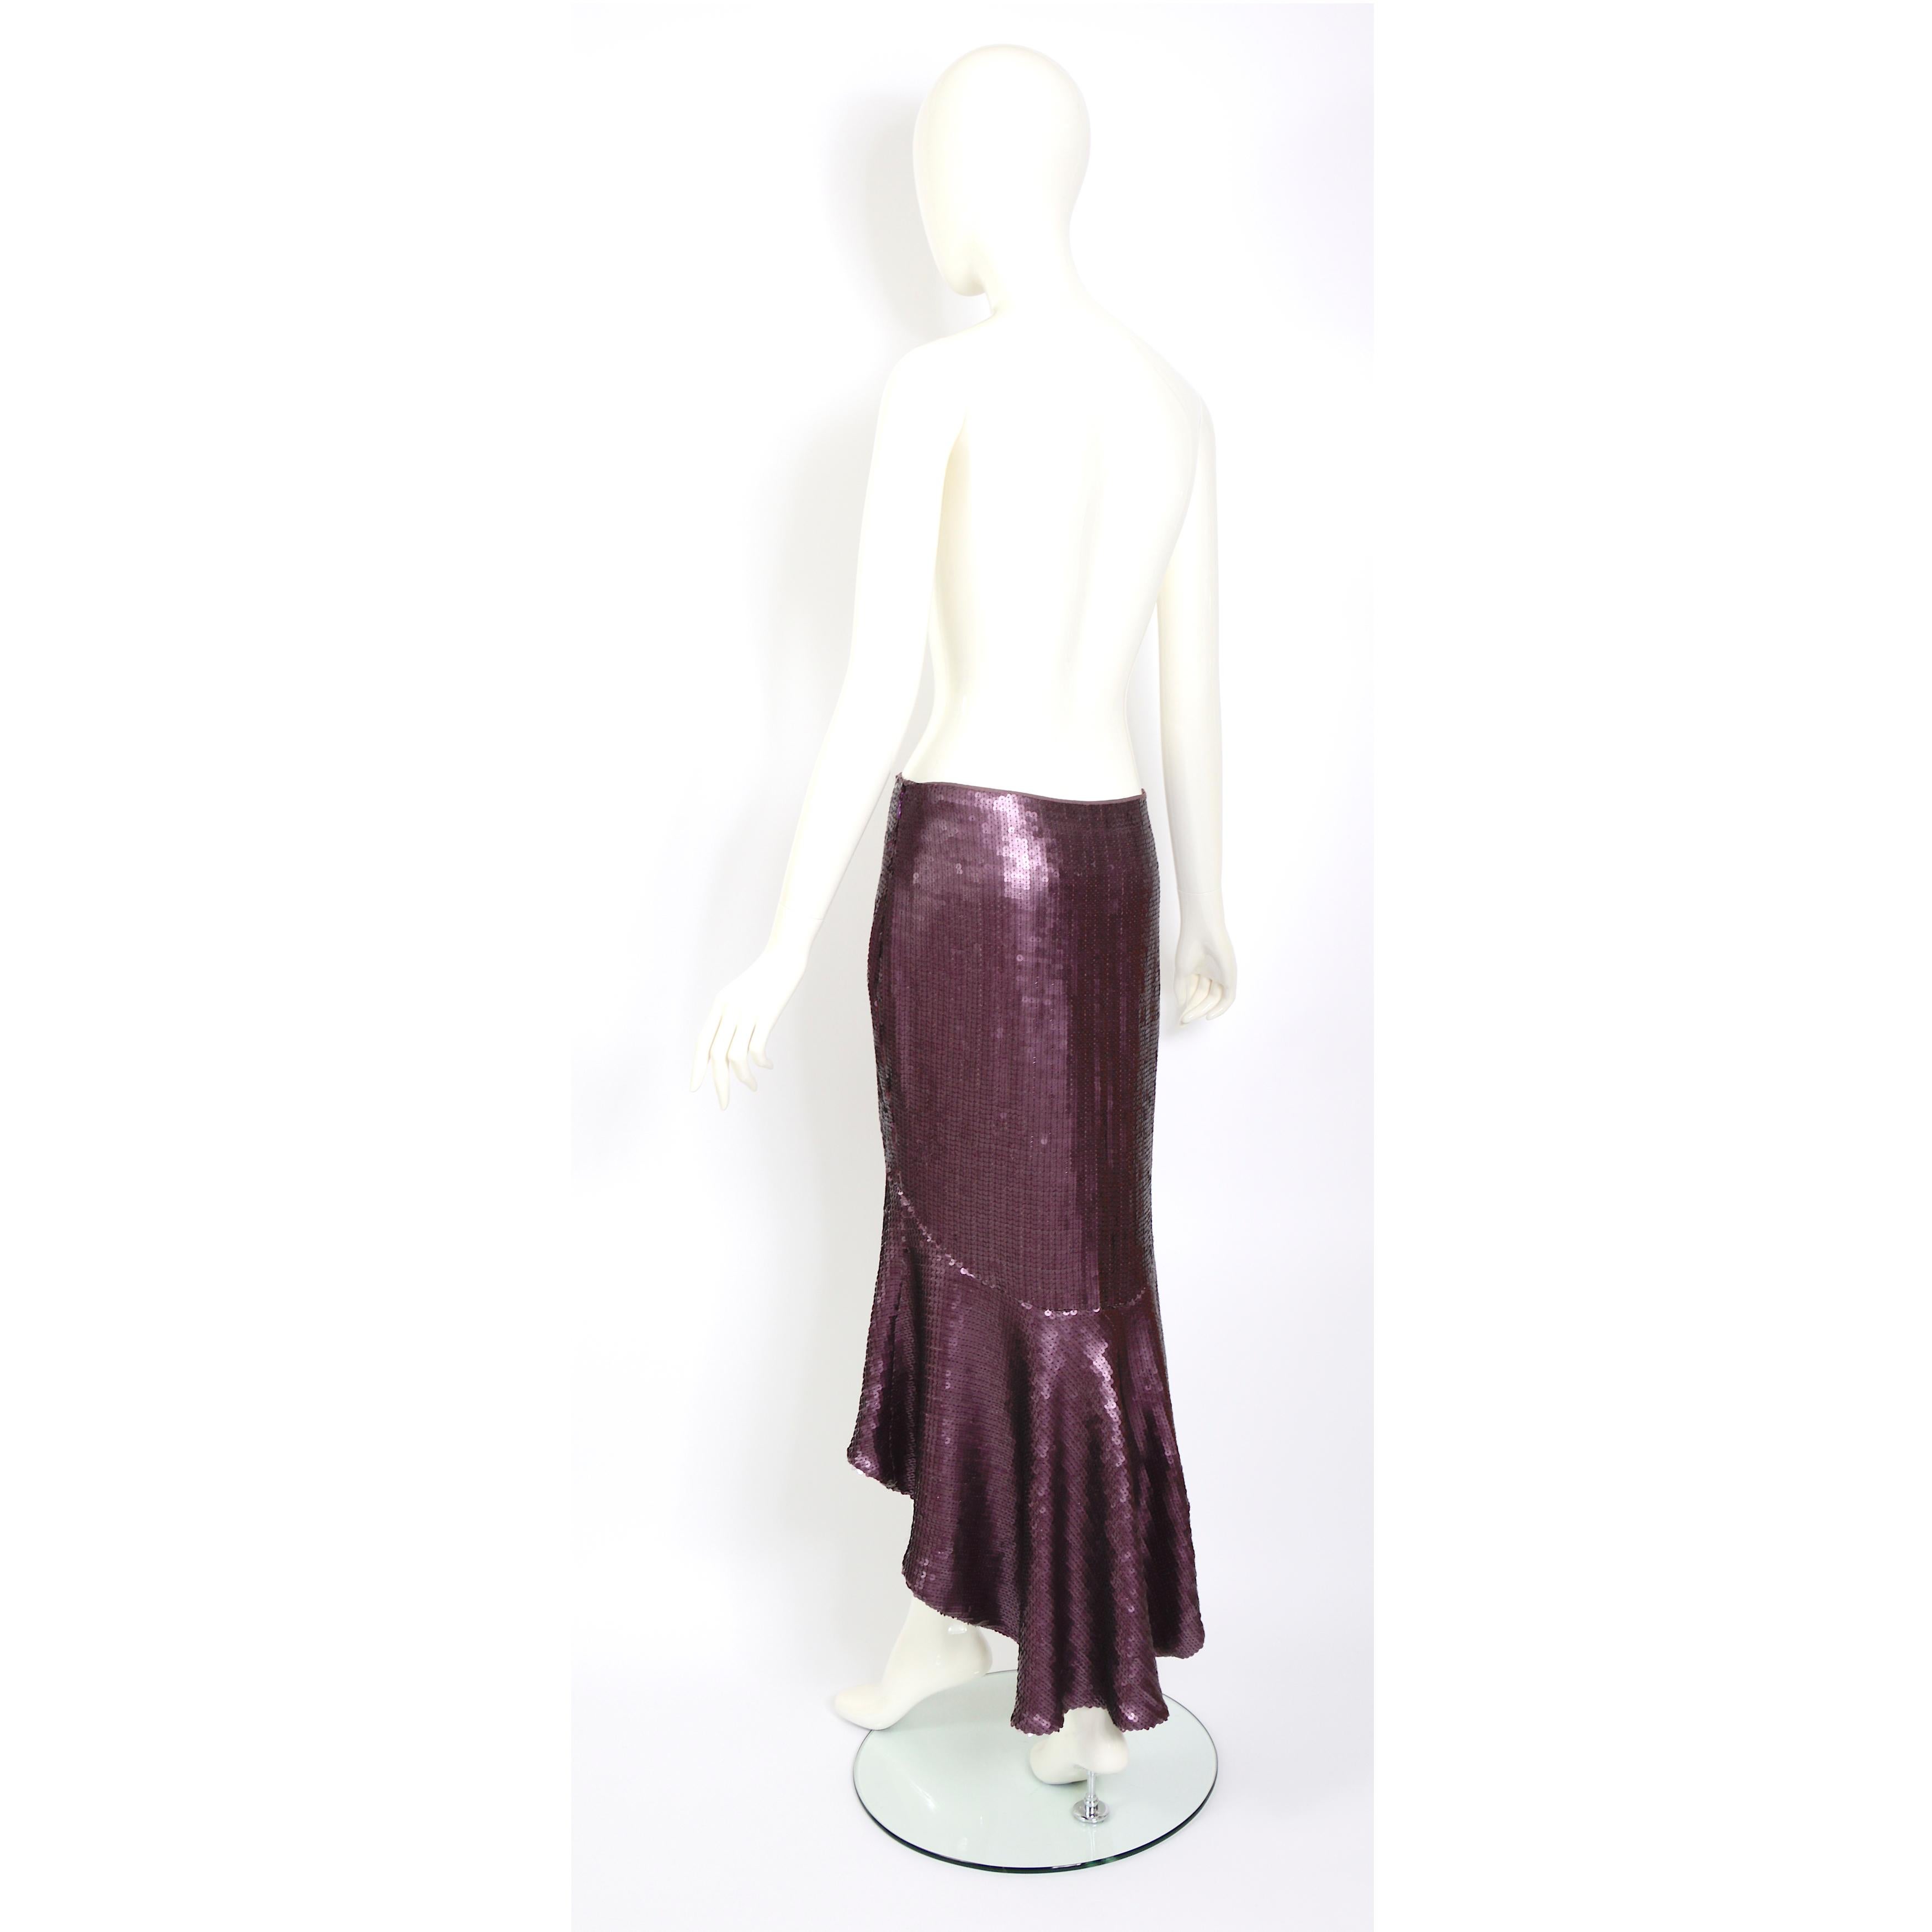 Chloé by Stella McCartney runway 1999 vintage sequin fishtail style skirt  For Sale 3